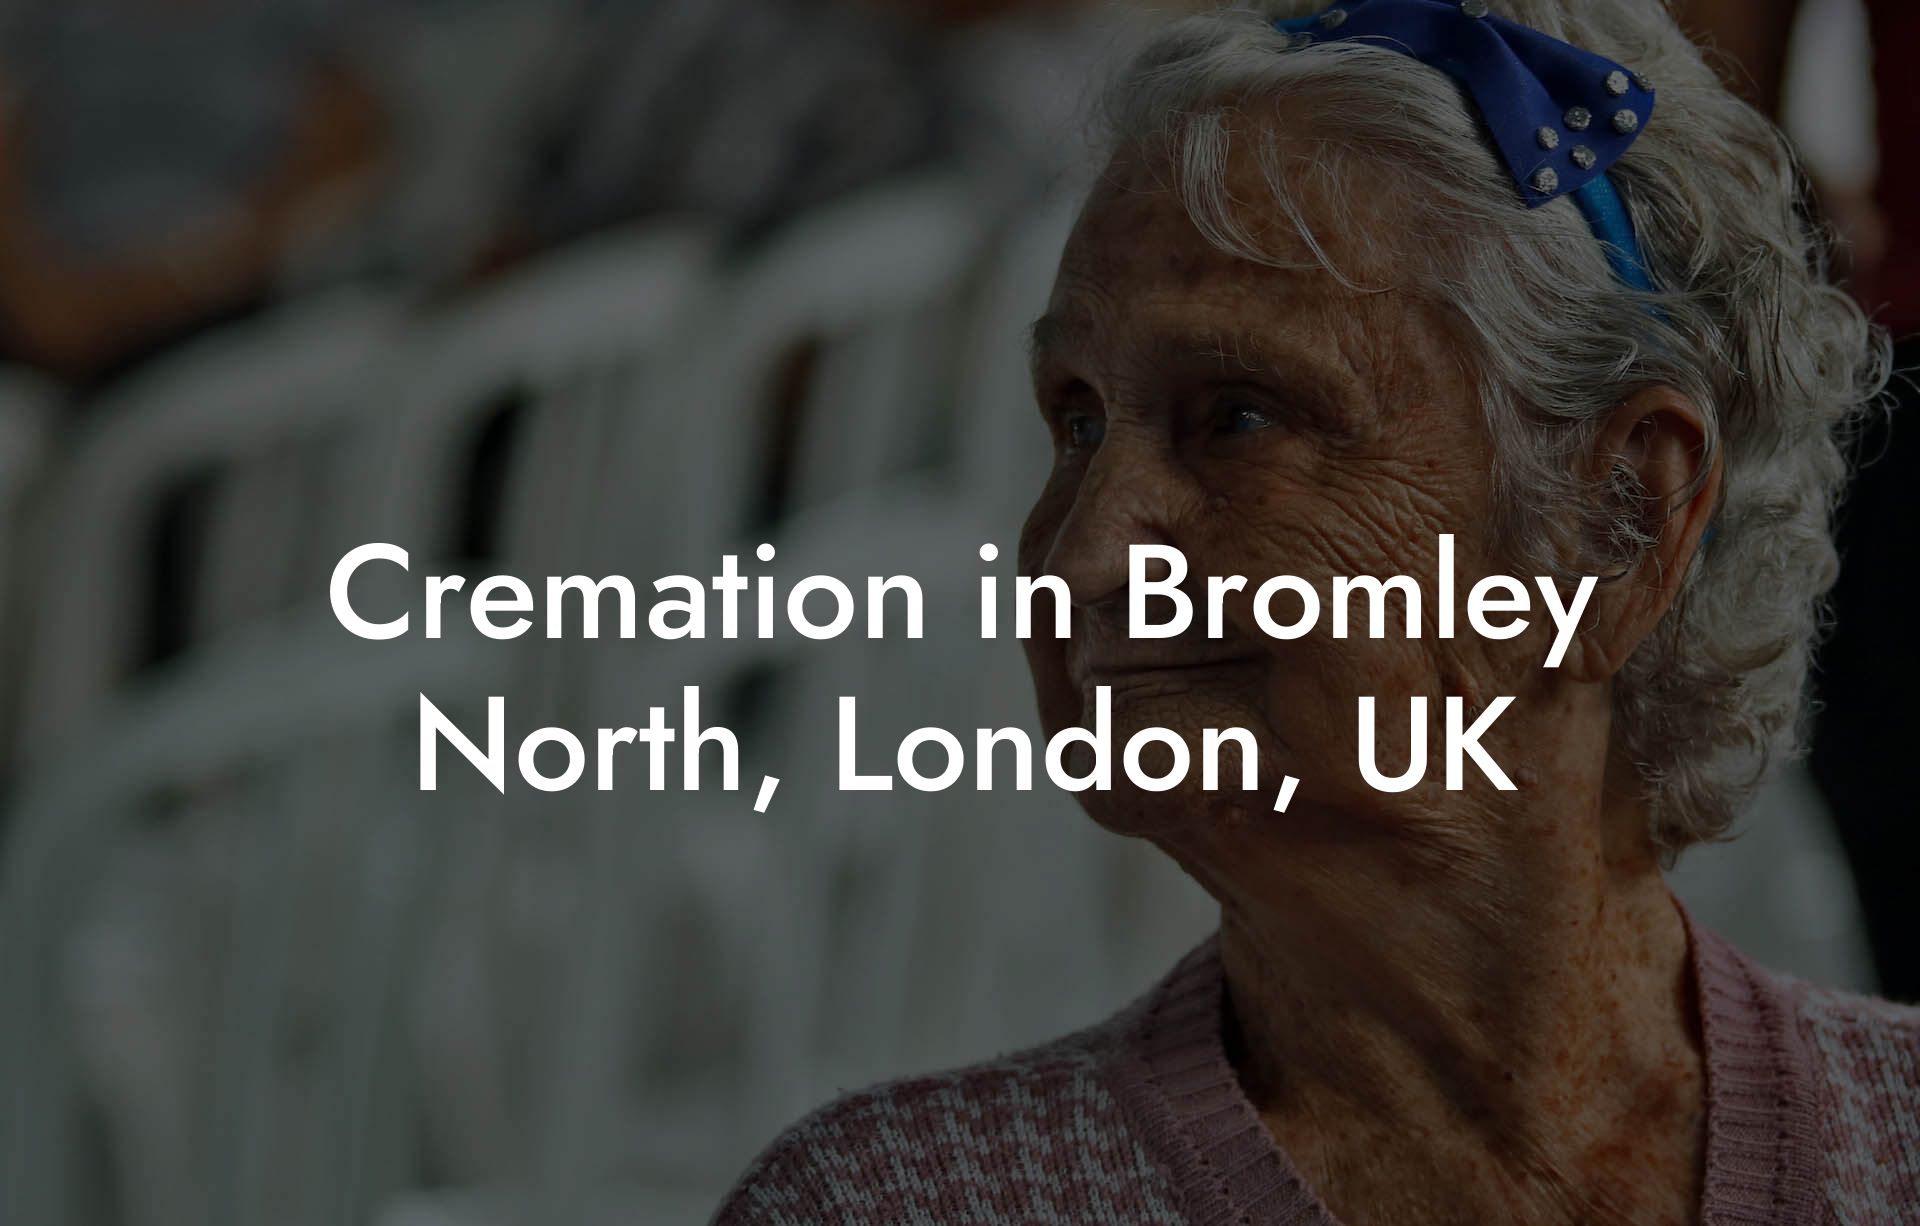 Cremation in Bromley North, London, UK